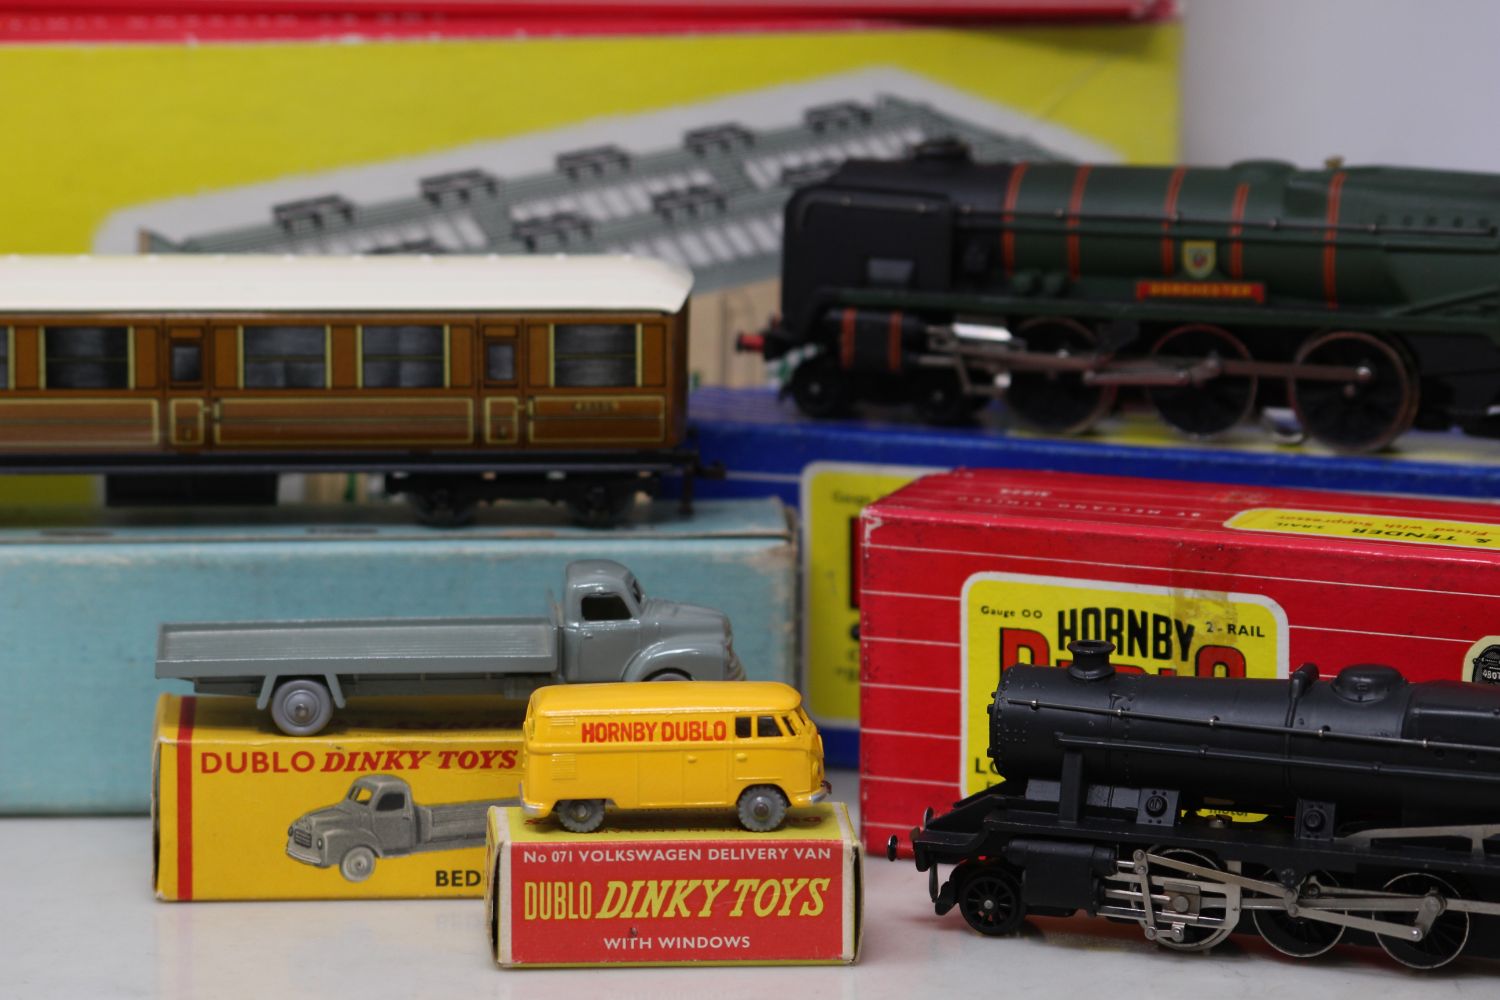 Sale of Model Railway, Diecast Models, Model Assembly Kits, and Tinplate Toys.